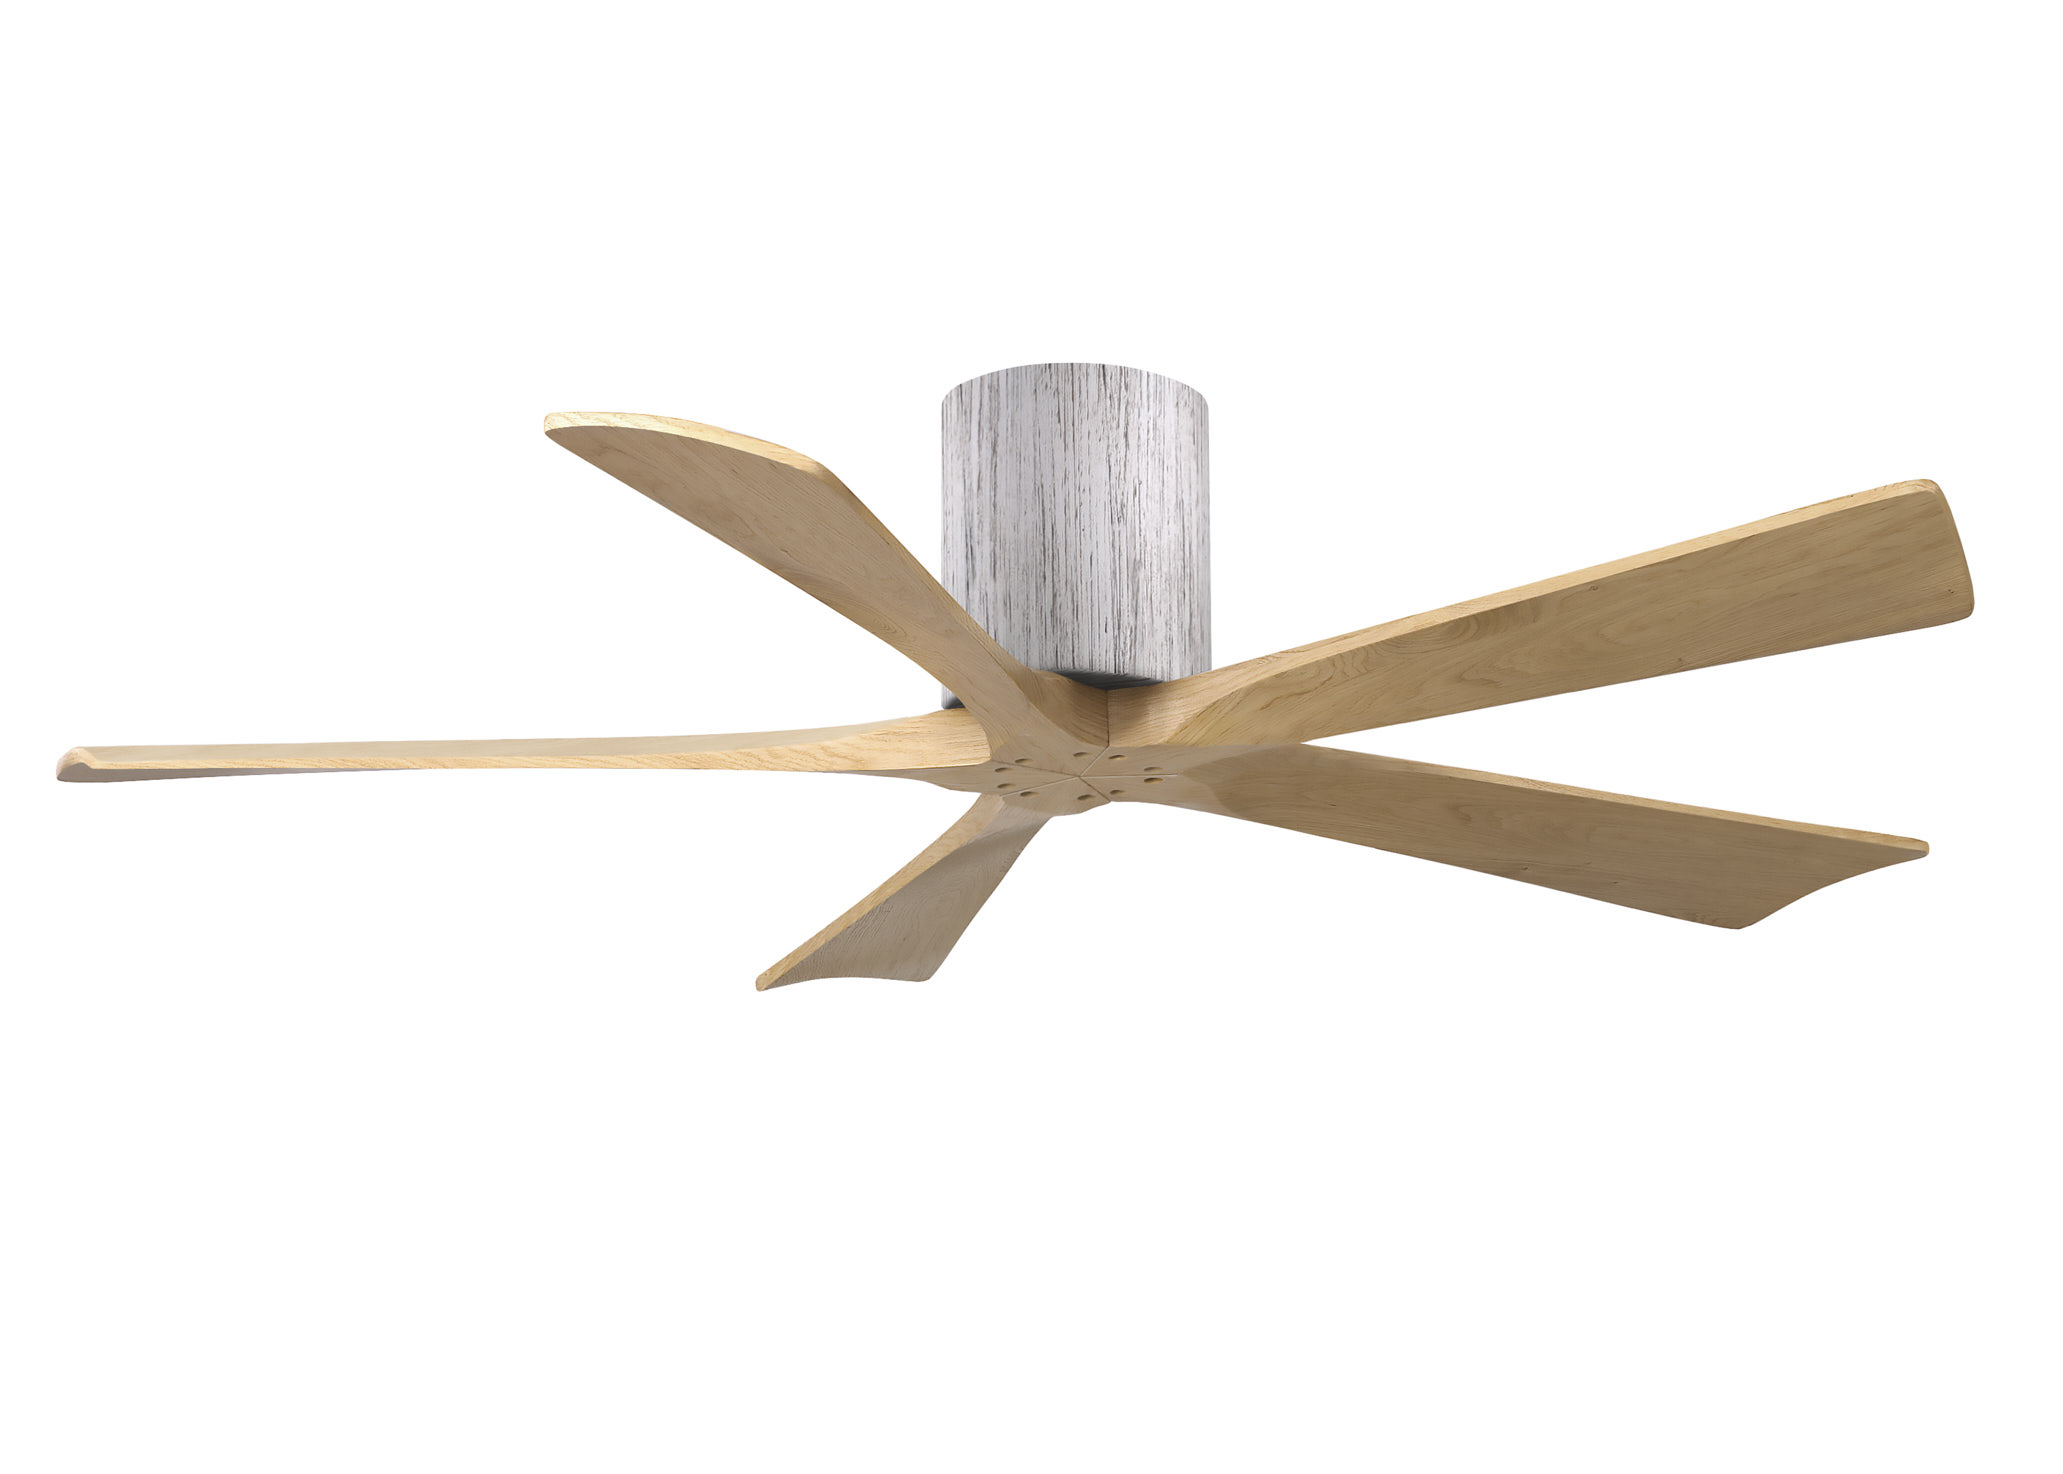 Irene-5H 6-speed ceiling fan in barn wood finish with 52